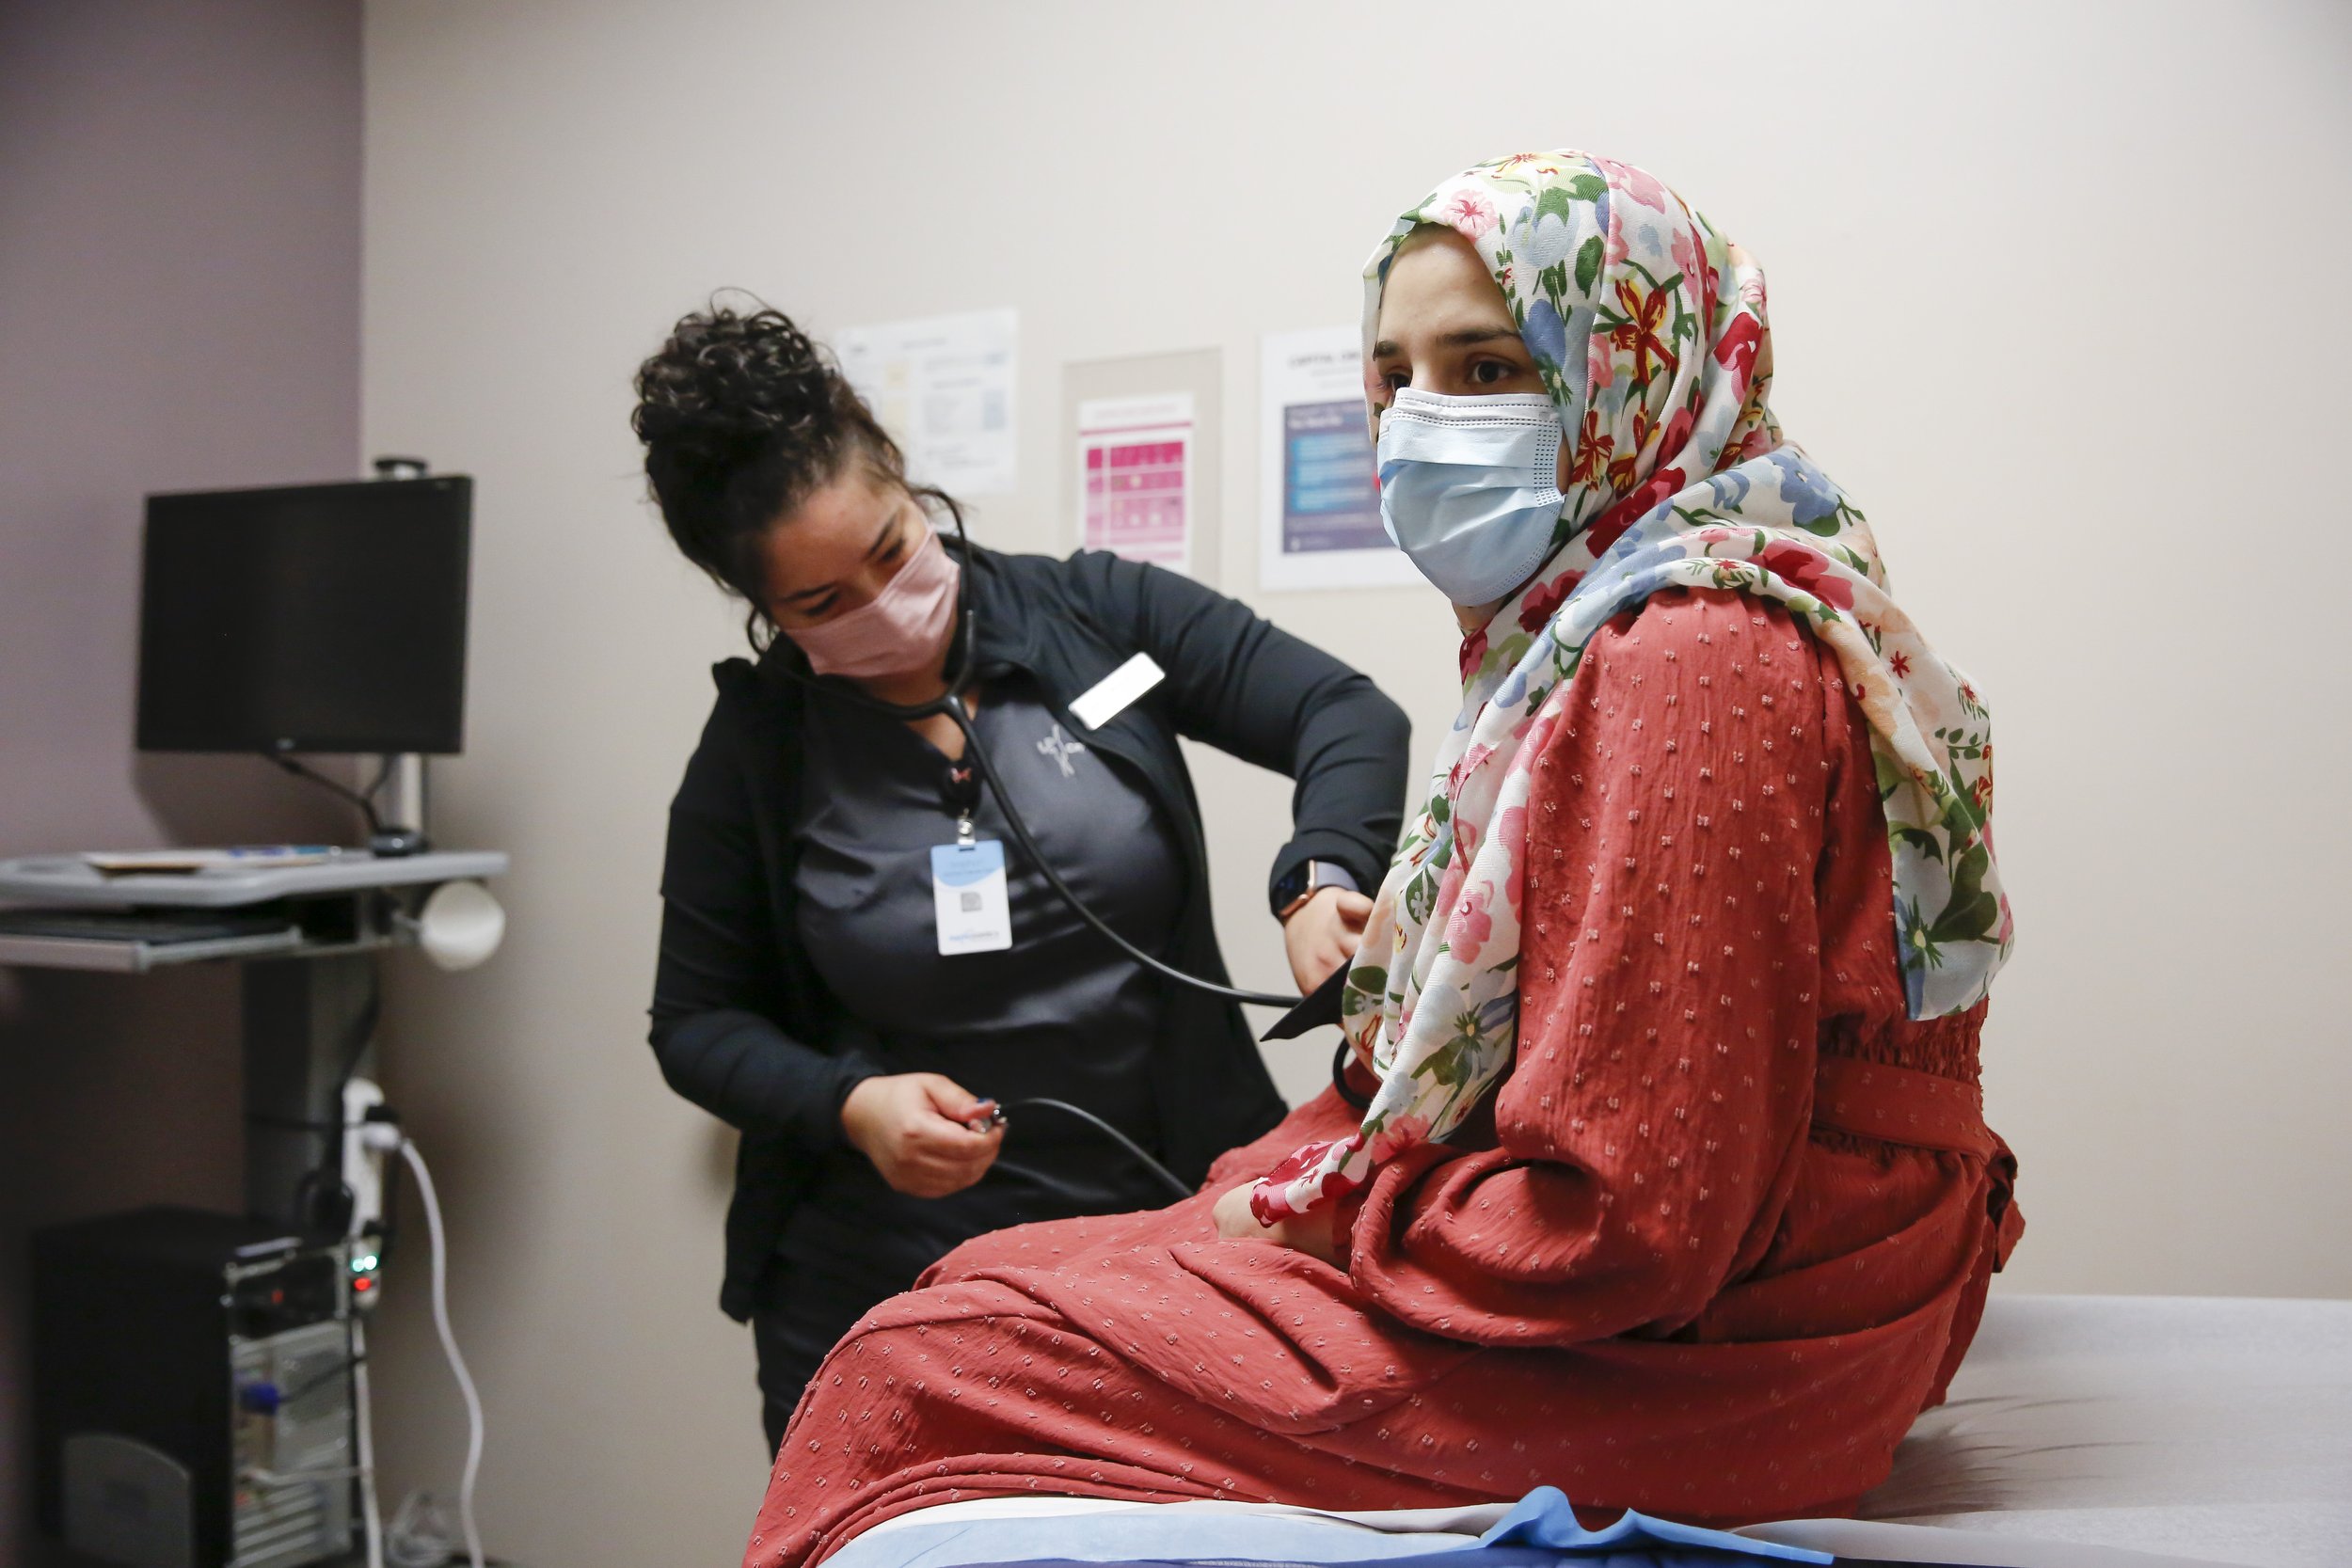  Susan Mohammadi has her blood pressure taken during an OBGYN appointment in Sacramento, Calif. on Tuesday, December 28, 2021. Najibullah Mohammadi, his wife Susan, their two young children Zahra and Yasar, and their soon-to-be born third child Yusuf